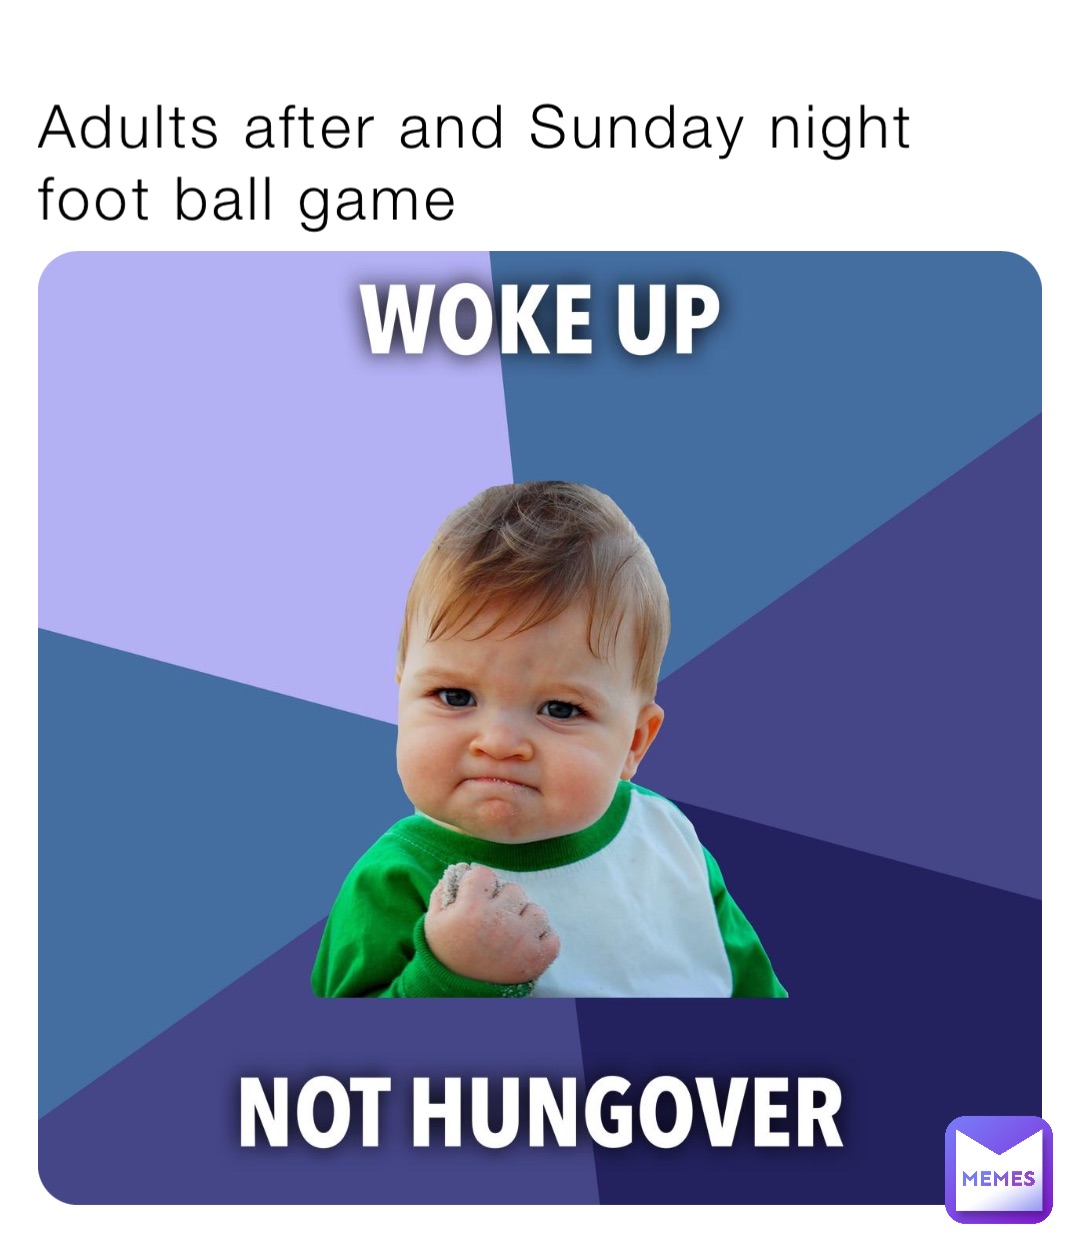 Adults after and Sunday night foot ball game